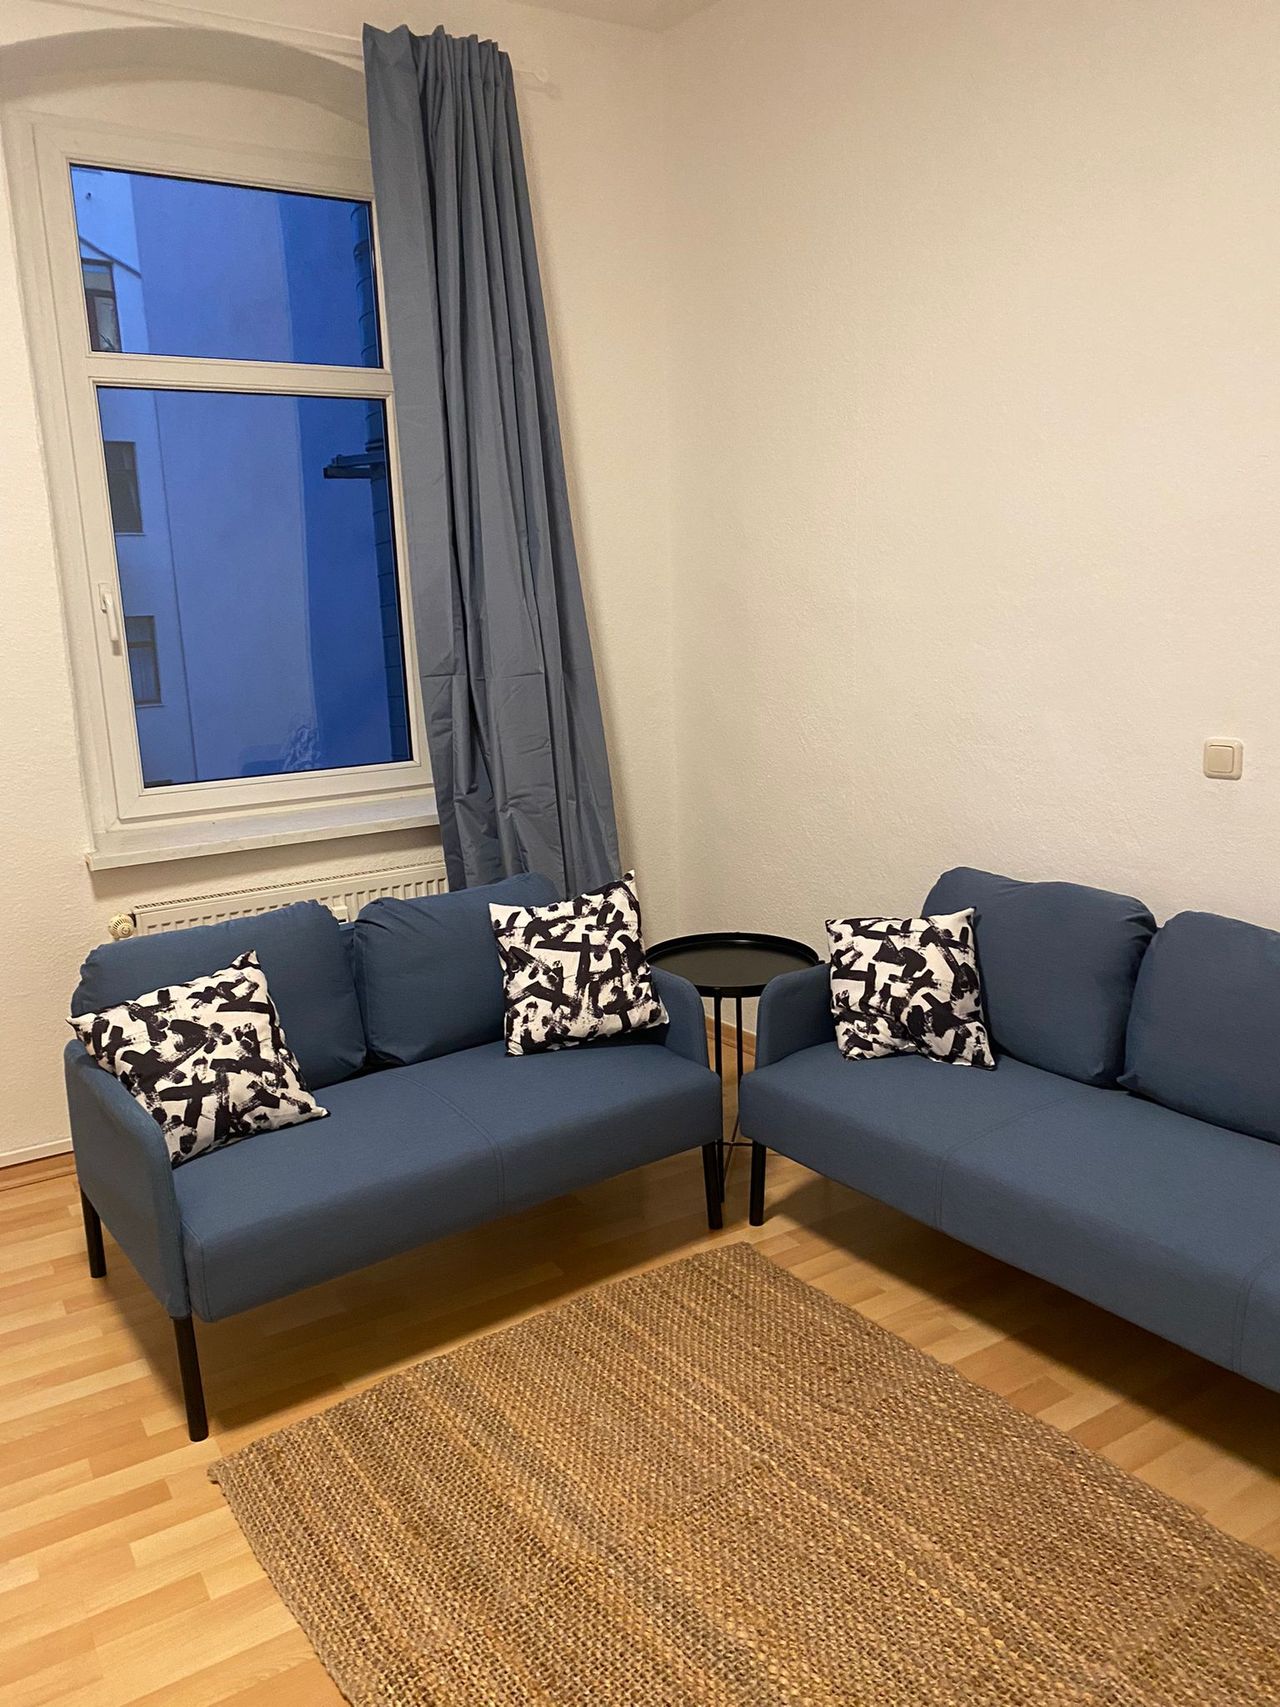 Stylish Furnished Apartment in Magdeburg – Ideal for Families, Groups, and Workers